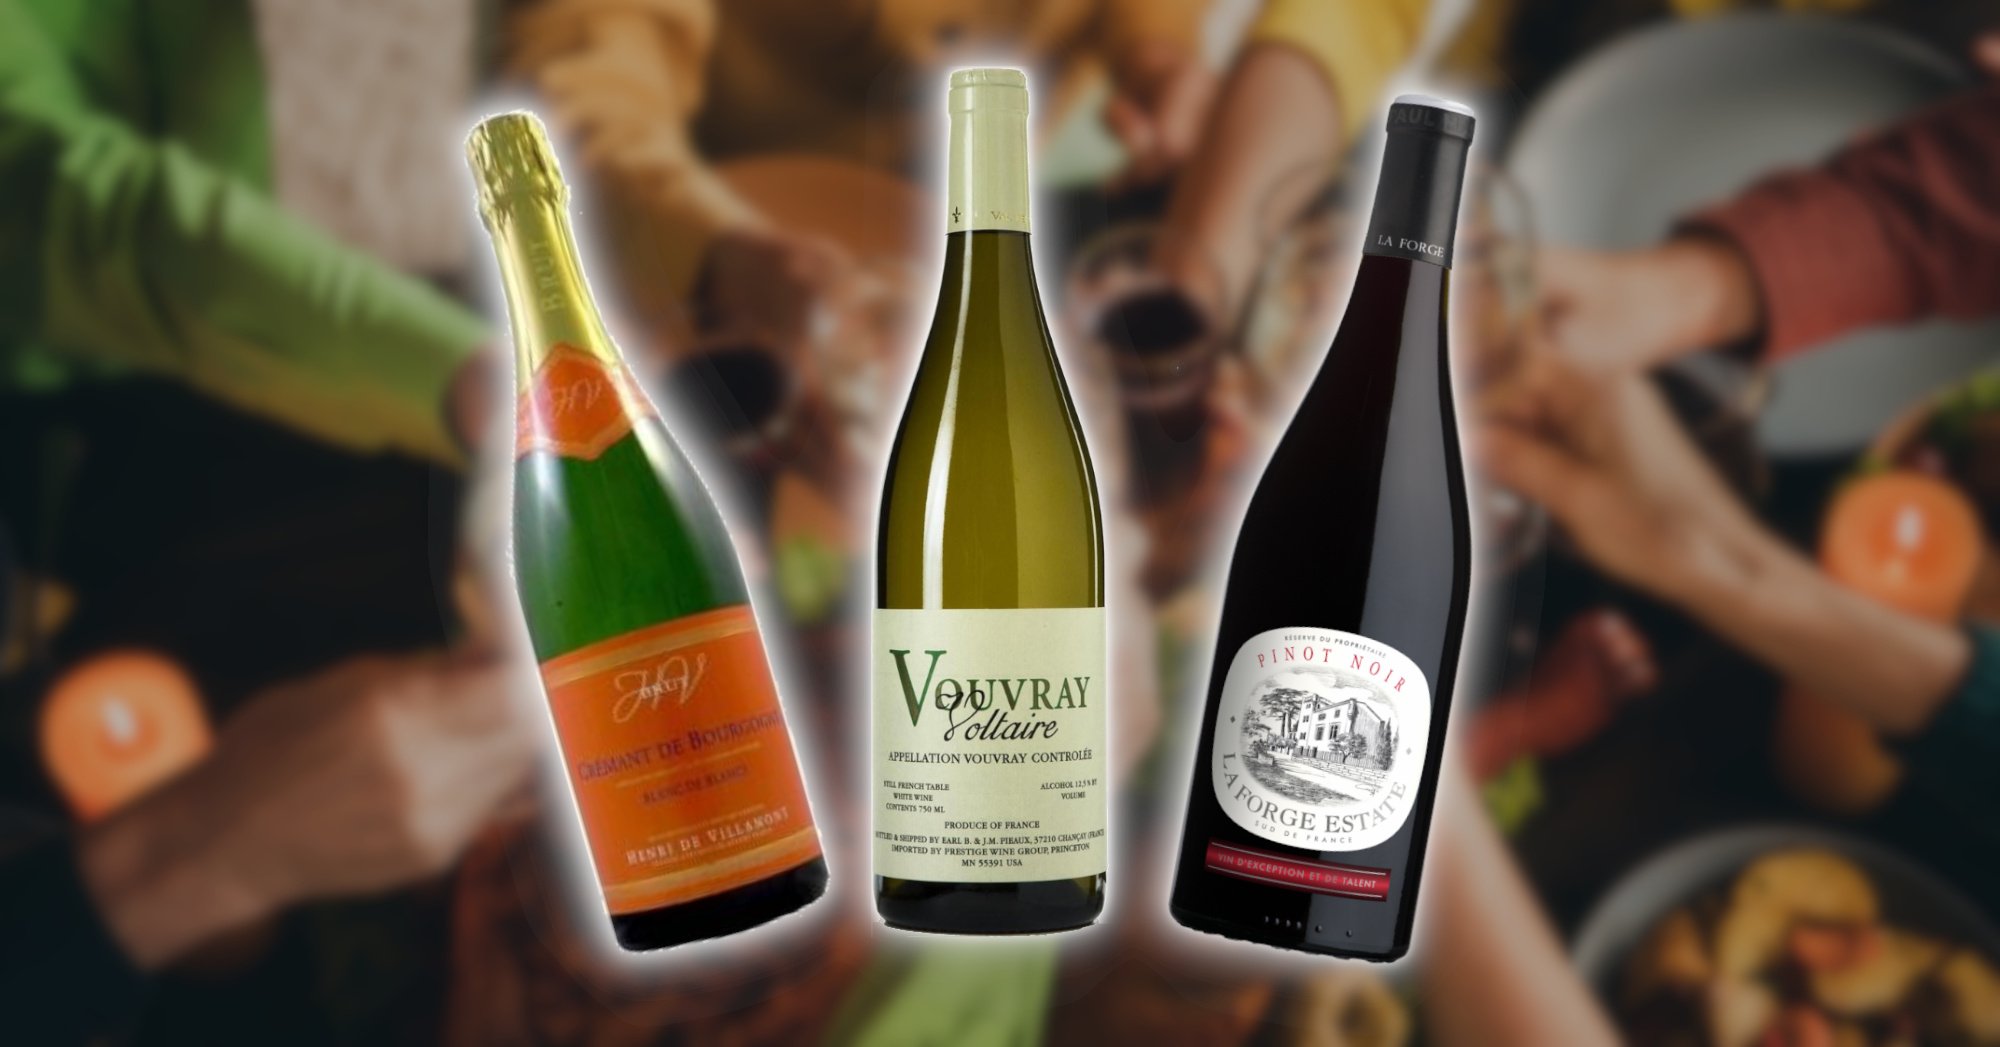 Three Affordable Wines for Thanksgiving - Cremant, Vouvray Voltaire, La Forge Pinot Noir